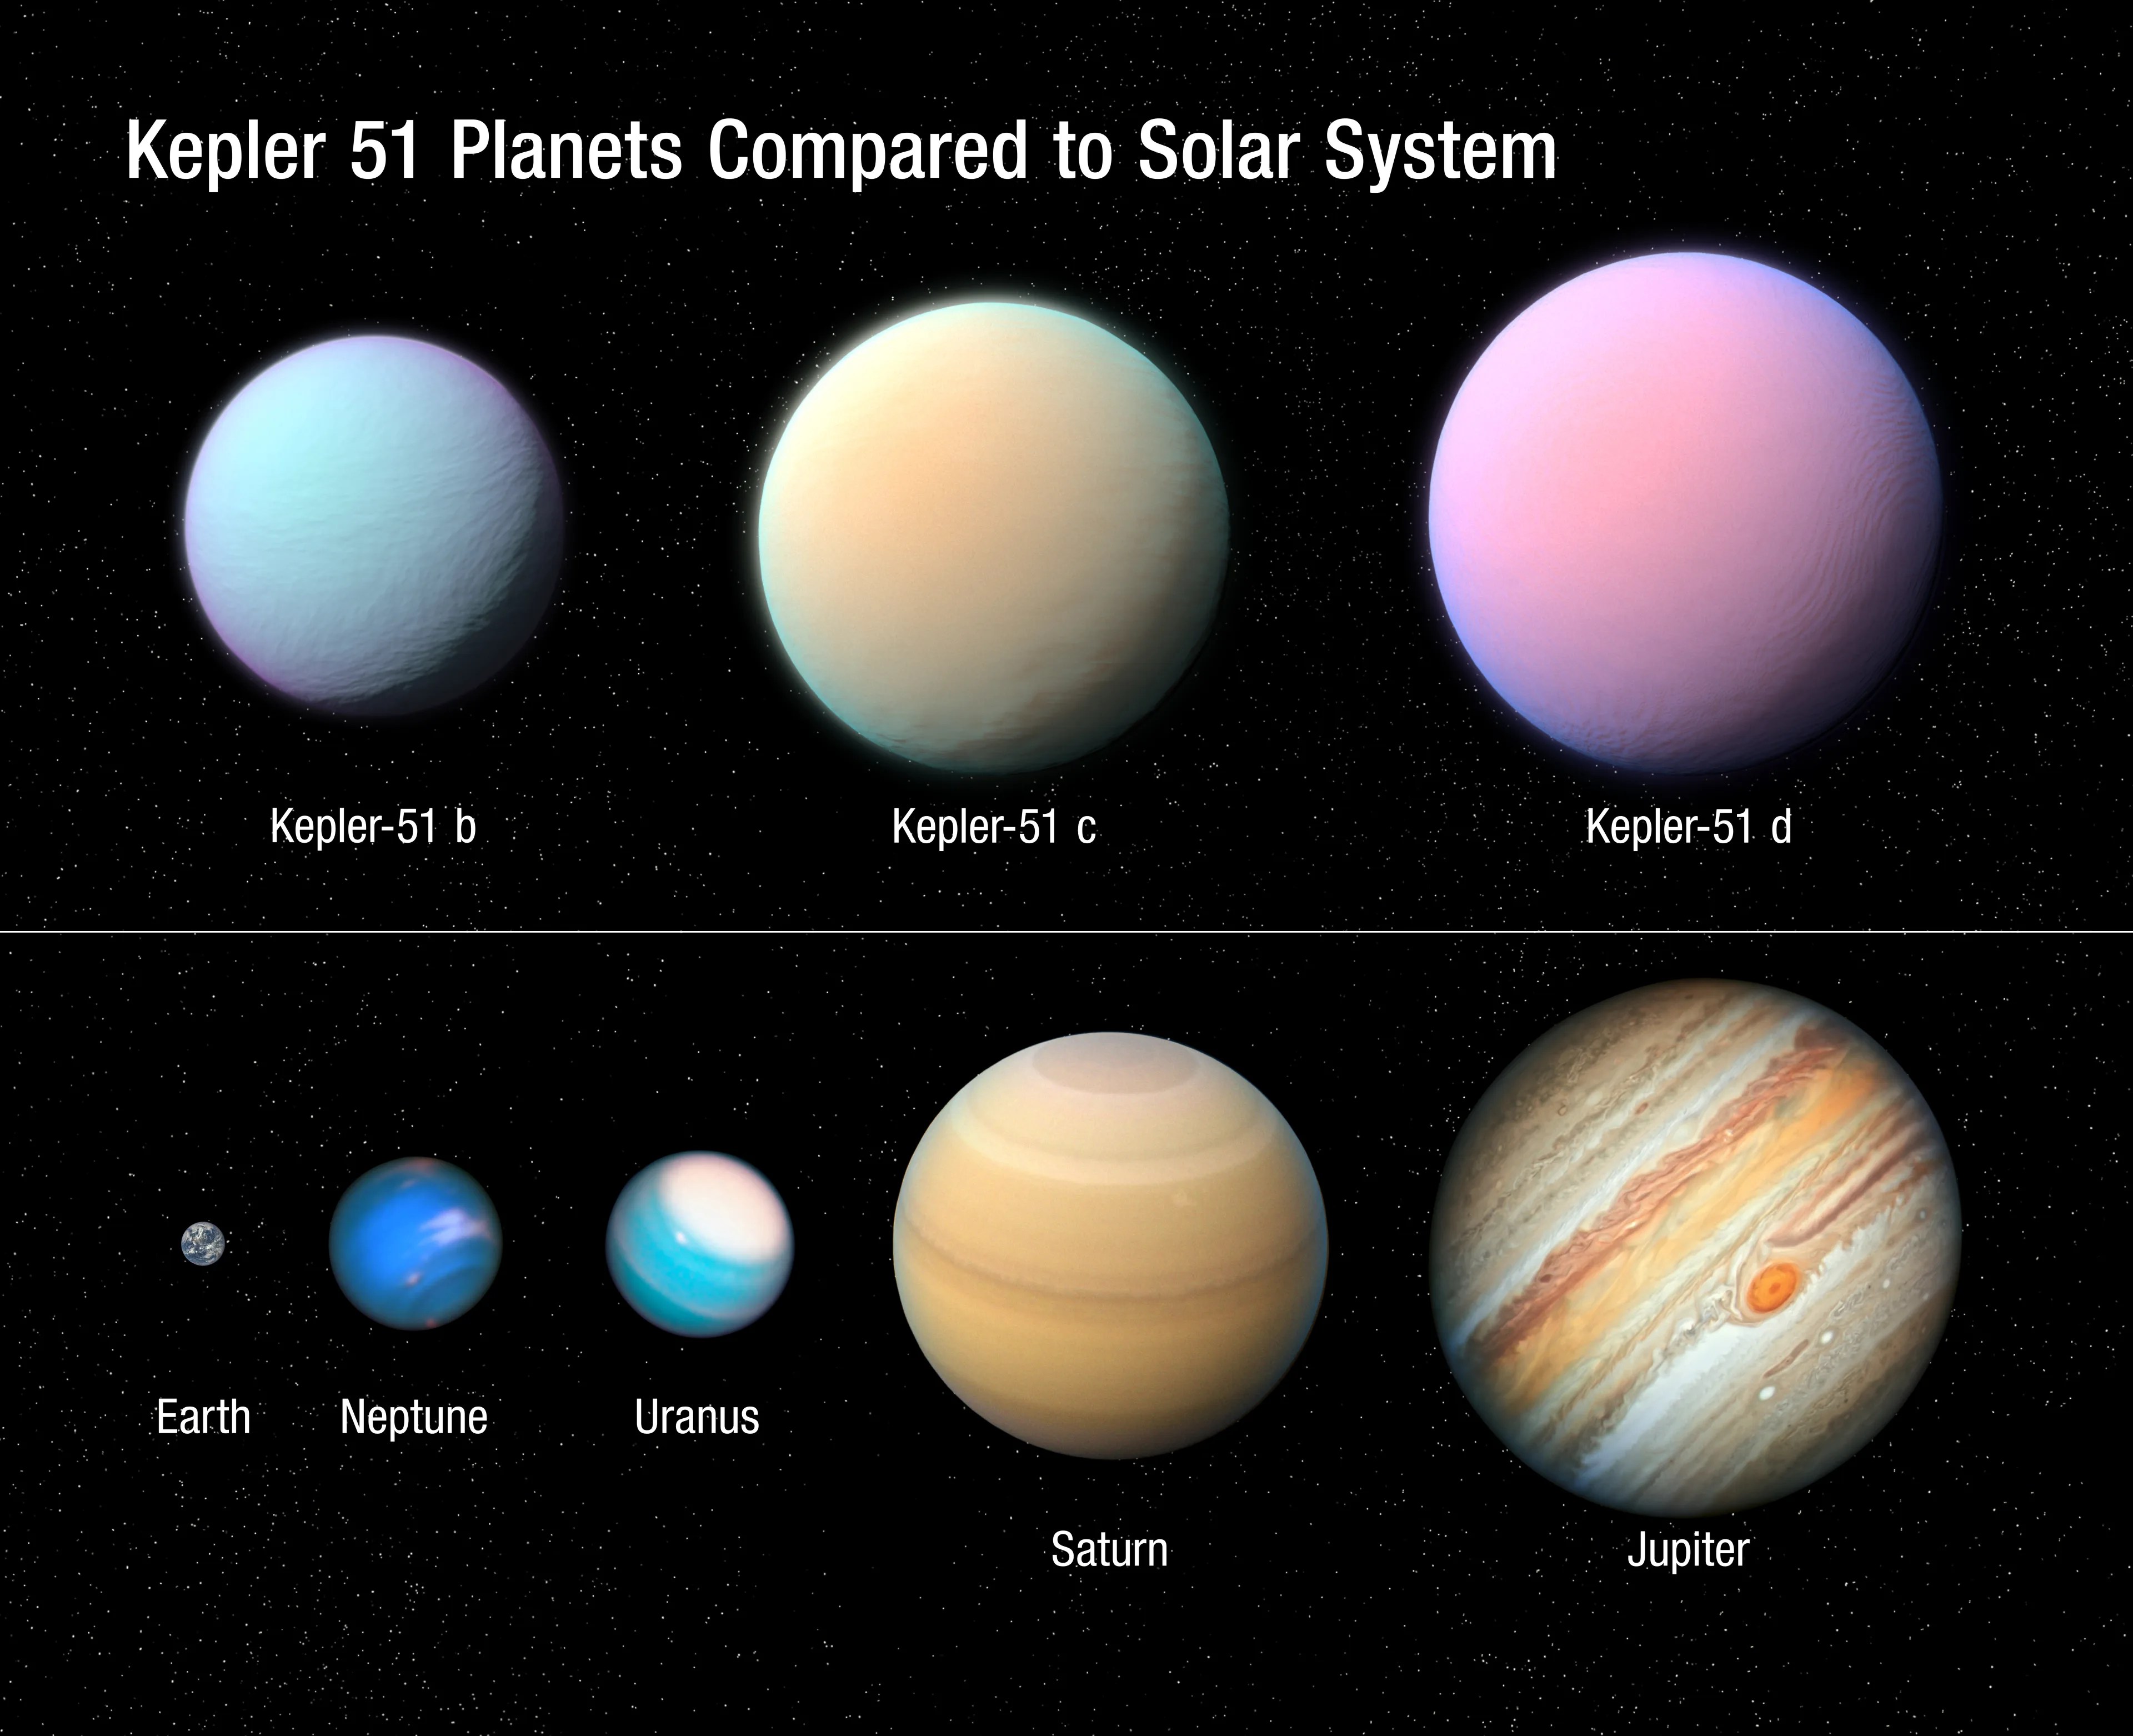 Size comparison of planets in our solar system with planets in Kepler 51 system. Three large Kepler 51 planets in the top row. Images of Earth, Neptune, Uranus, Saturn, and Jupiter for comparison in the bottom row.